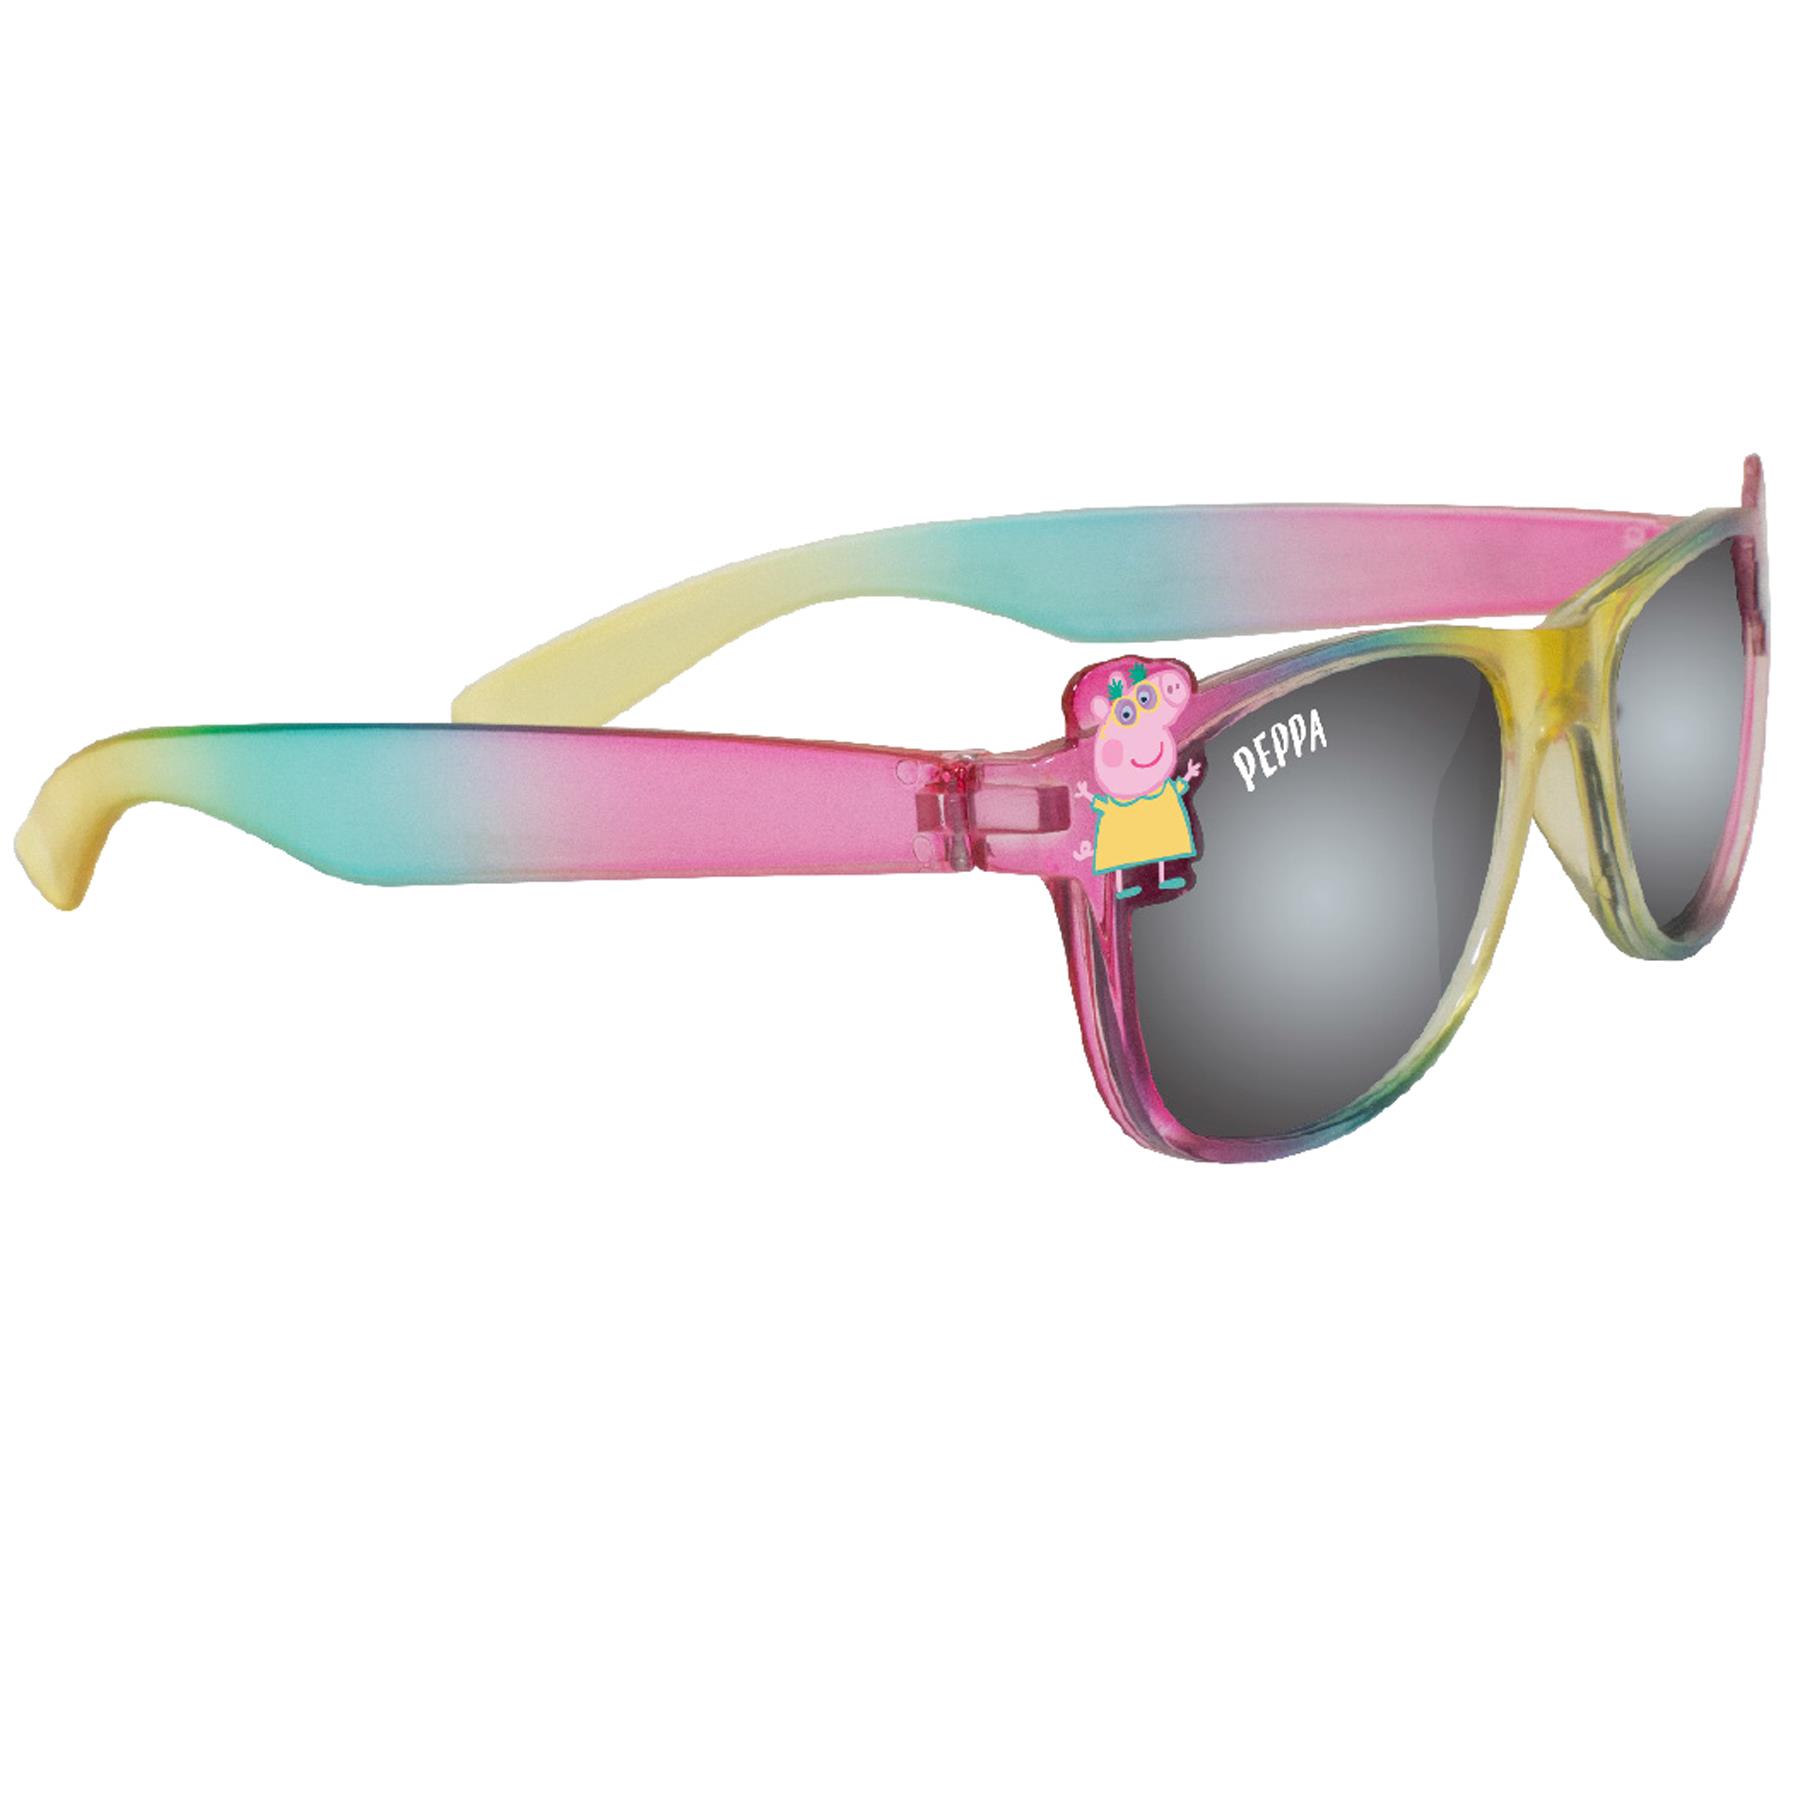 Peppa Pig Children's Character Sunglasses UV protection for Holiday - PEPPA9